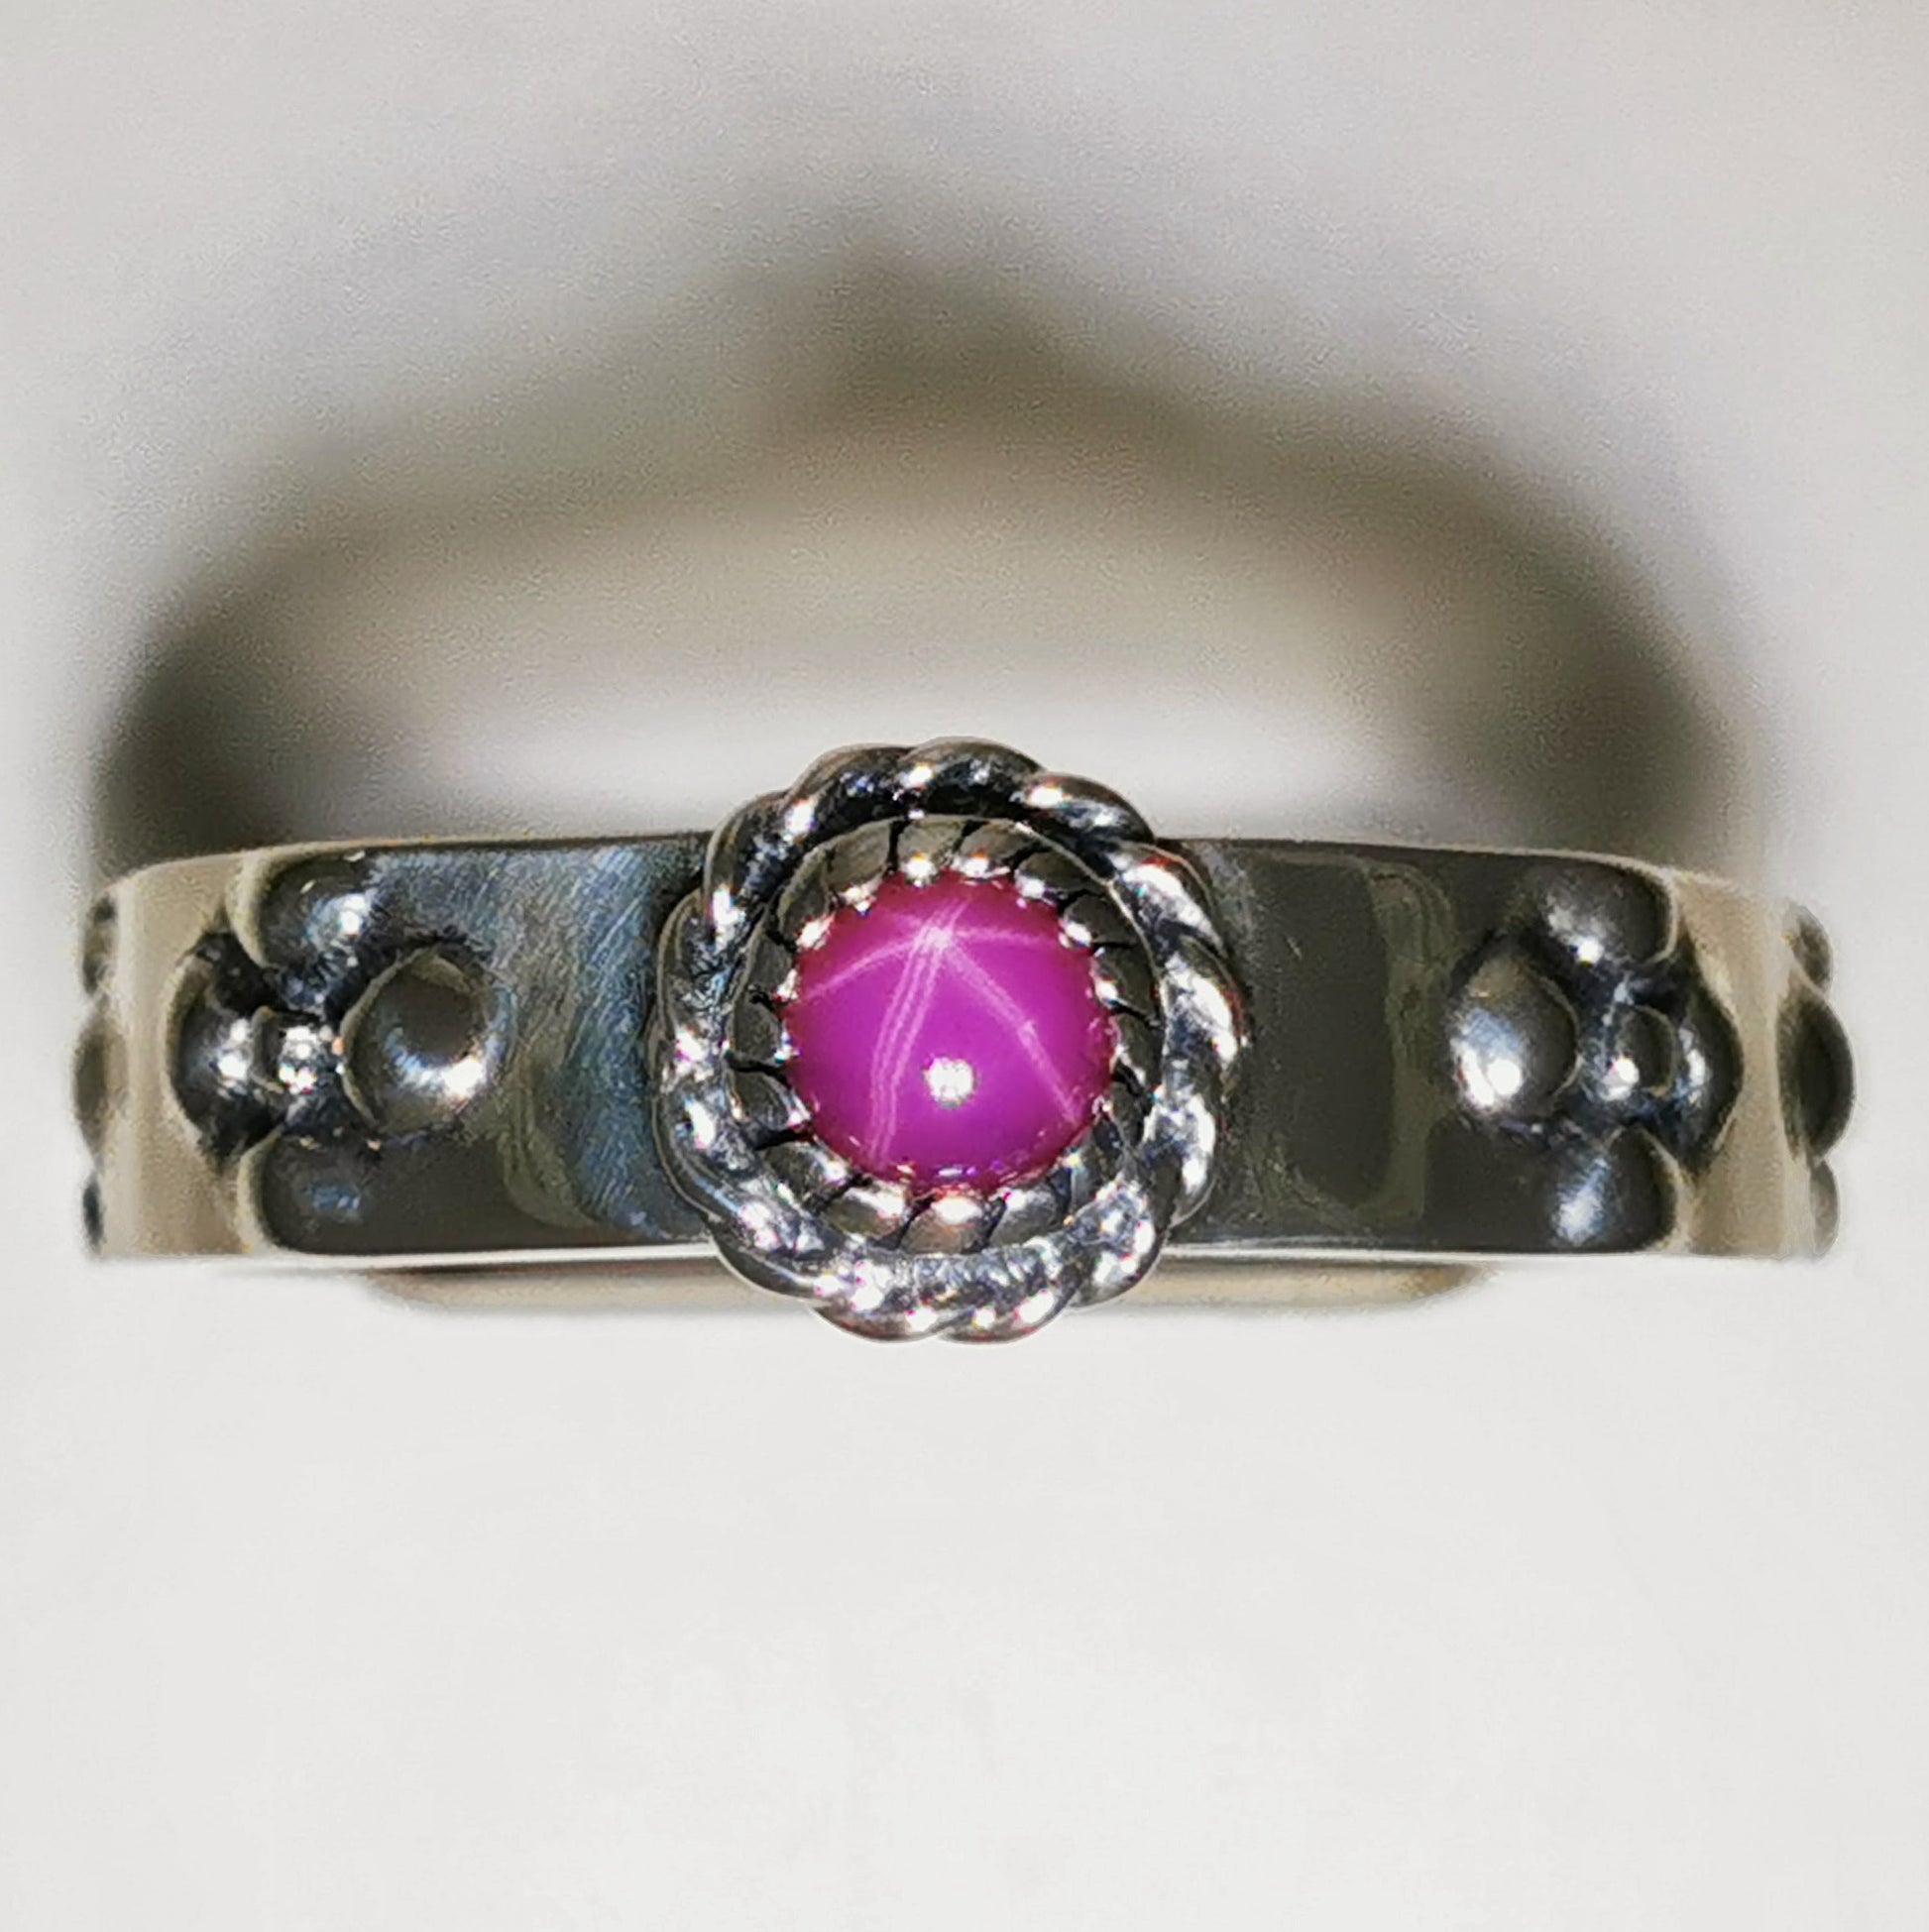 Howls Moving Castle Ring in Sterling Silver with Synthetic Star Ruby, 925 silver geek jewelry, 925 silver flower band, sterling silver Fire band, Howl's ring, Howl's Moving Castle Ring, Howl's cosplay band, Howl's Calcifer ring, Anime Lover Ring, Anime Lover Jewellery, Anime Lover Jewelry, Anime Silver Gemstone Ring, Star Ruby Silver Ring, Star Ruby Ring, How’s Moving Castle Gemstone Ring